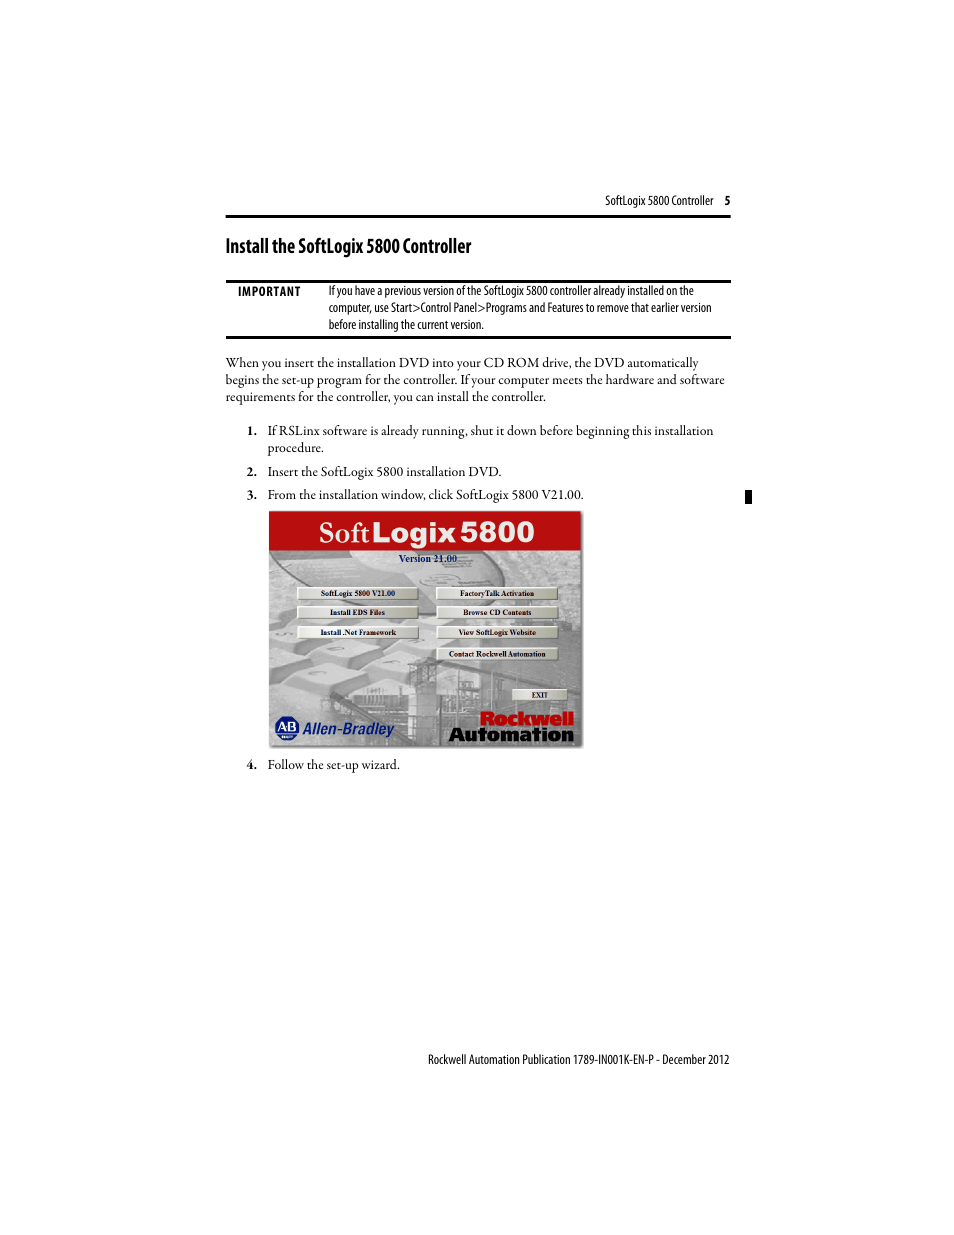 Install the softlogix 5800 controller | Rockwell Automation 1789-L10_L30_L60 SoftLogix 5800 Controller Installation Instructions User Manual | Page 5 / 14